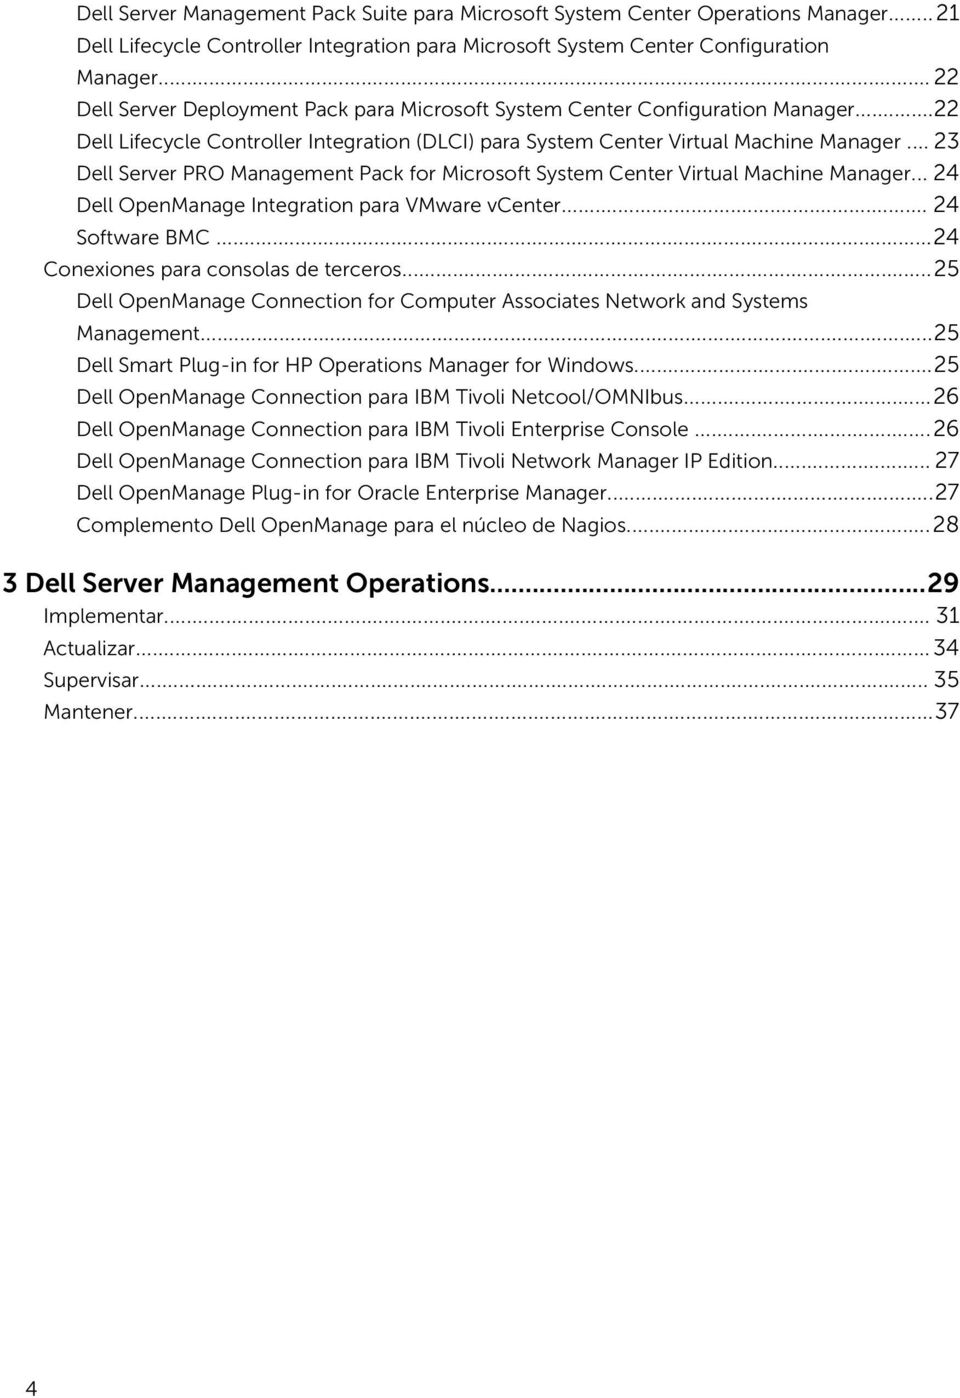 .. 23 Dell Server PRO Management Pack for Microsoft System Center Virtual Machine Manager... 24 Dell OpenManage Integration para VMware vcenter... 24 Software BMC.